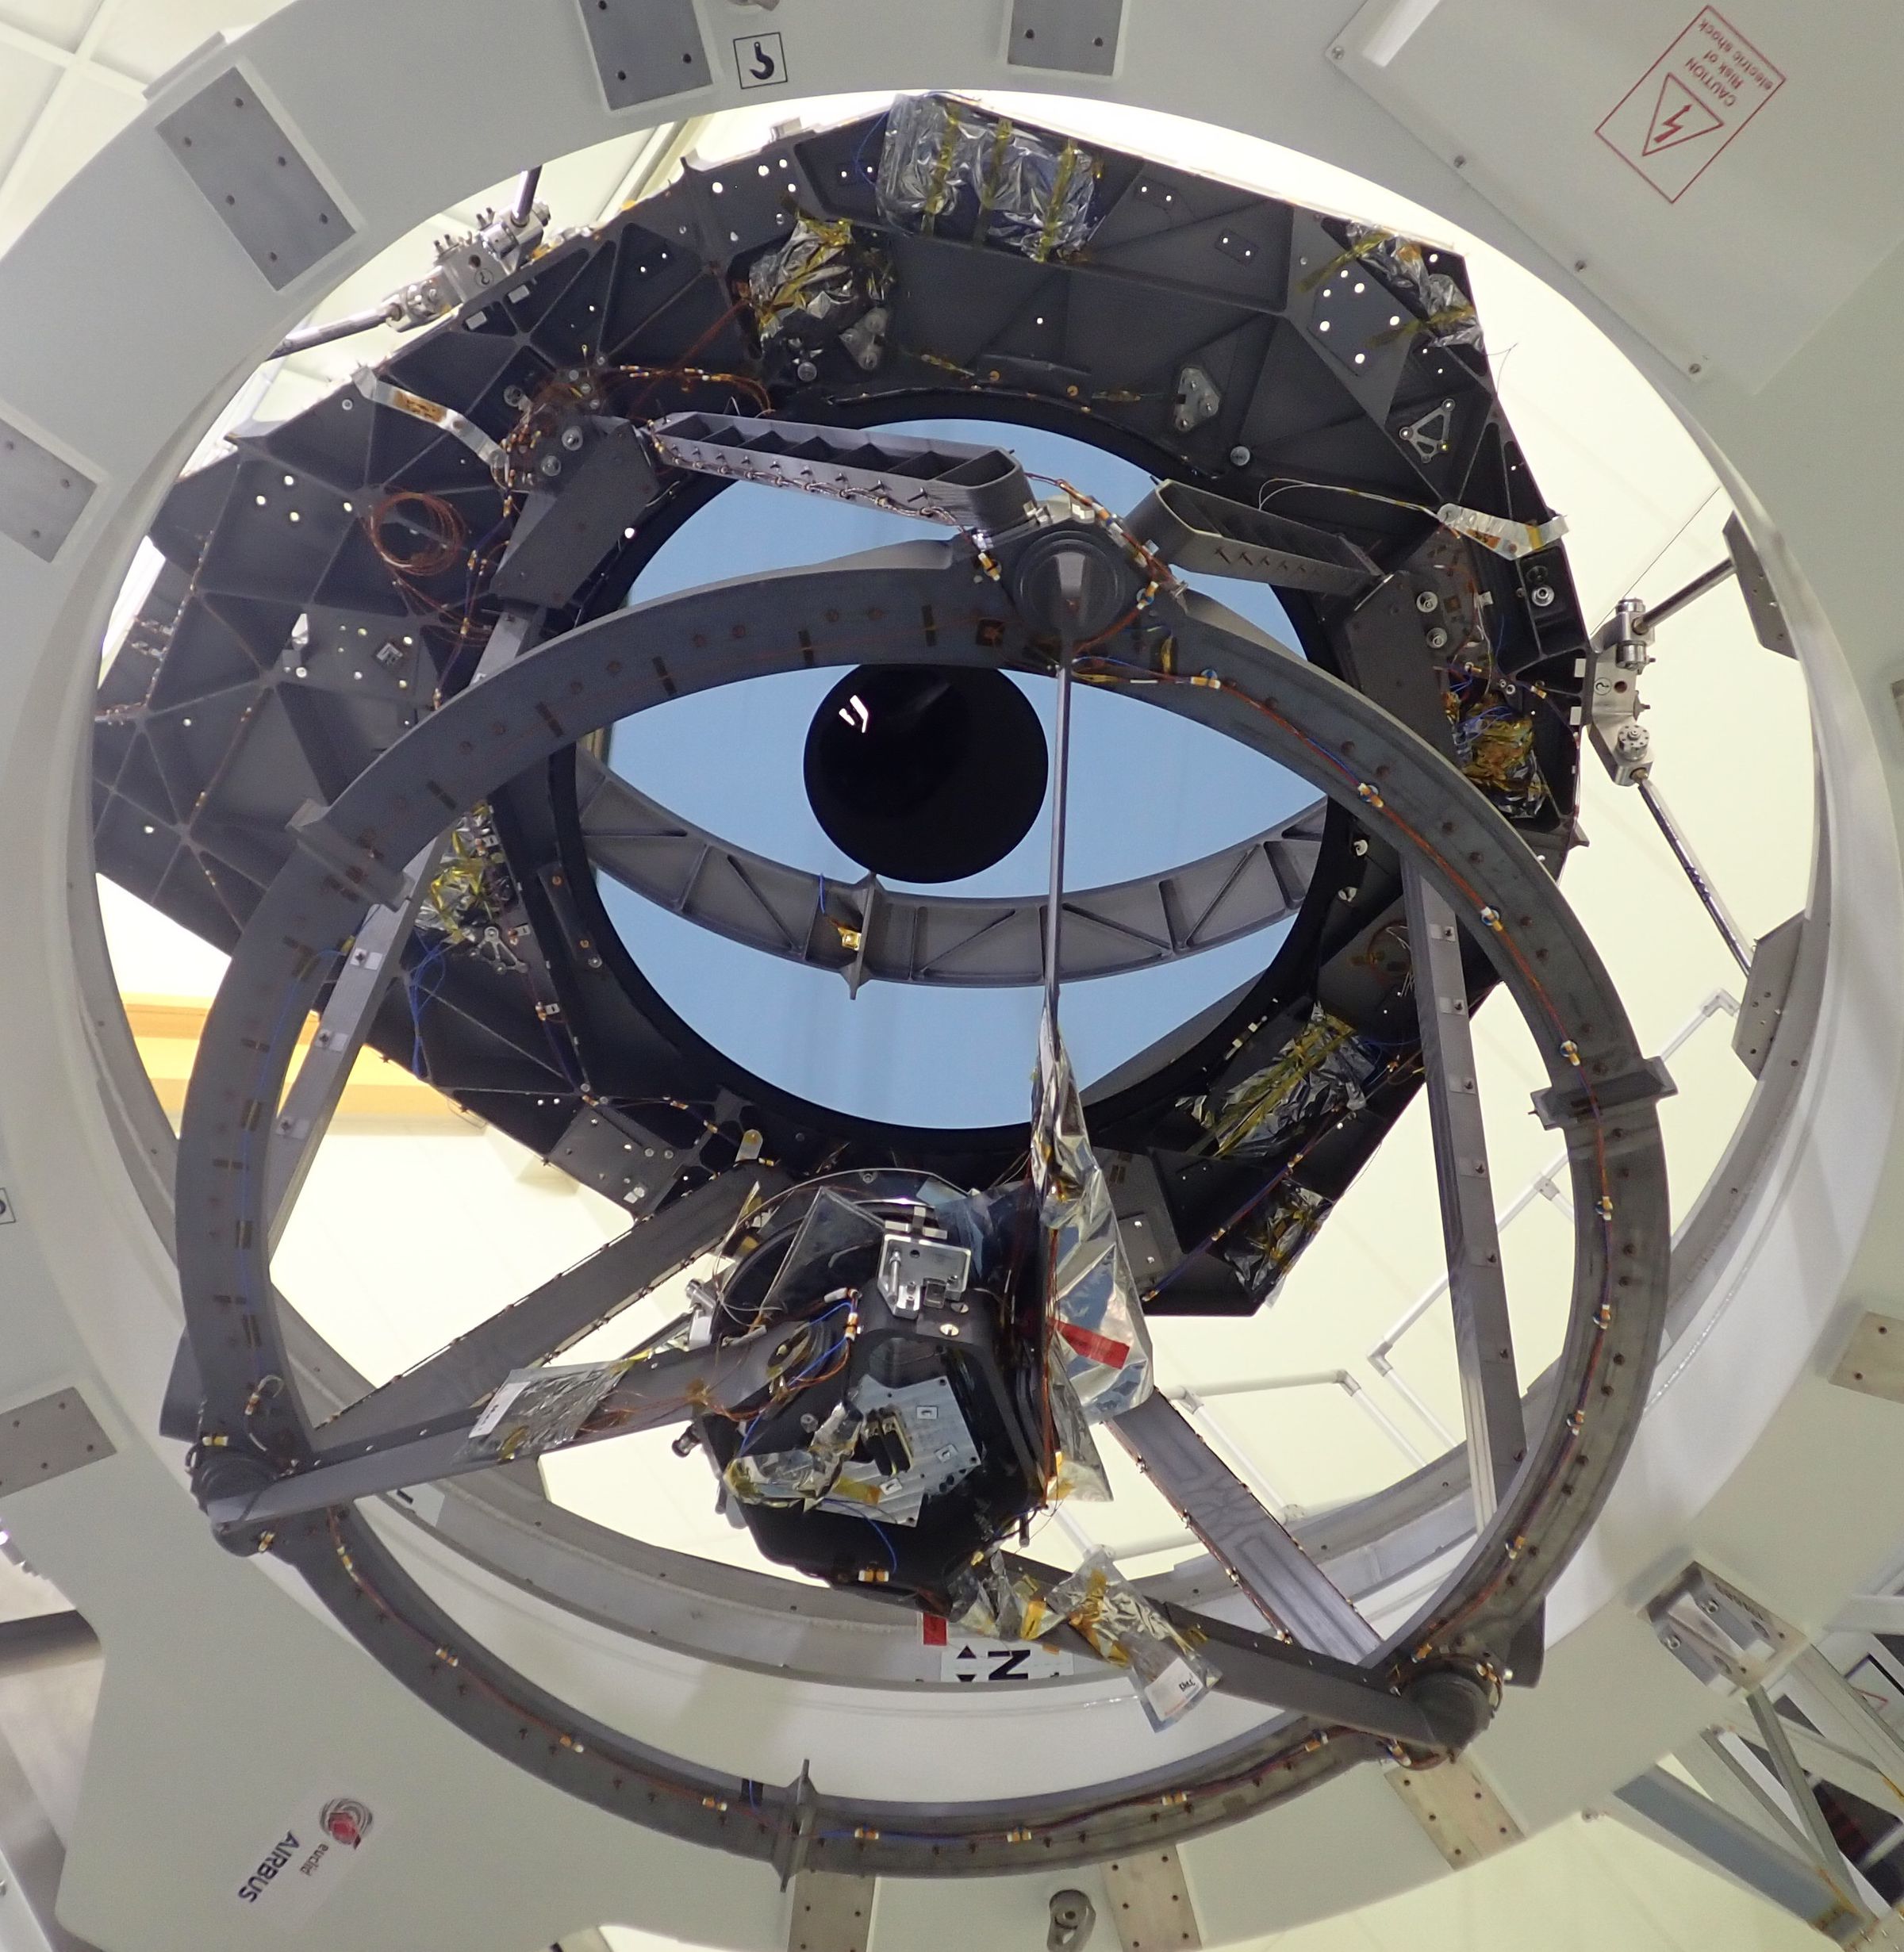 The 1.2-m diameter main mirror of ESA’s Euclid mission to unveil the dark Universe, seen during assembly, integration and testing.